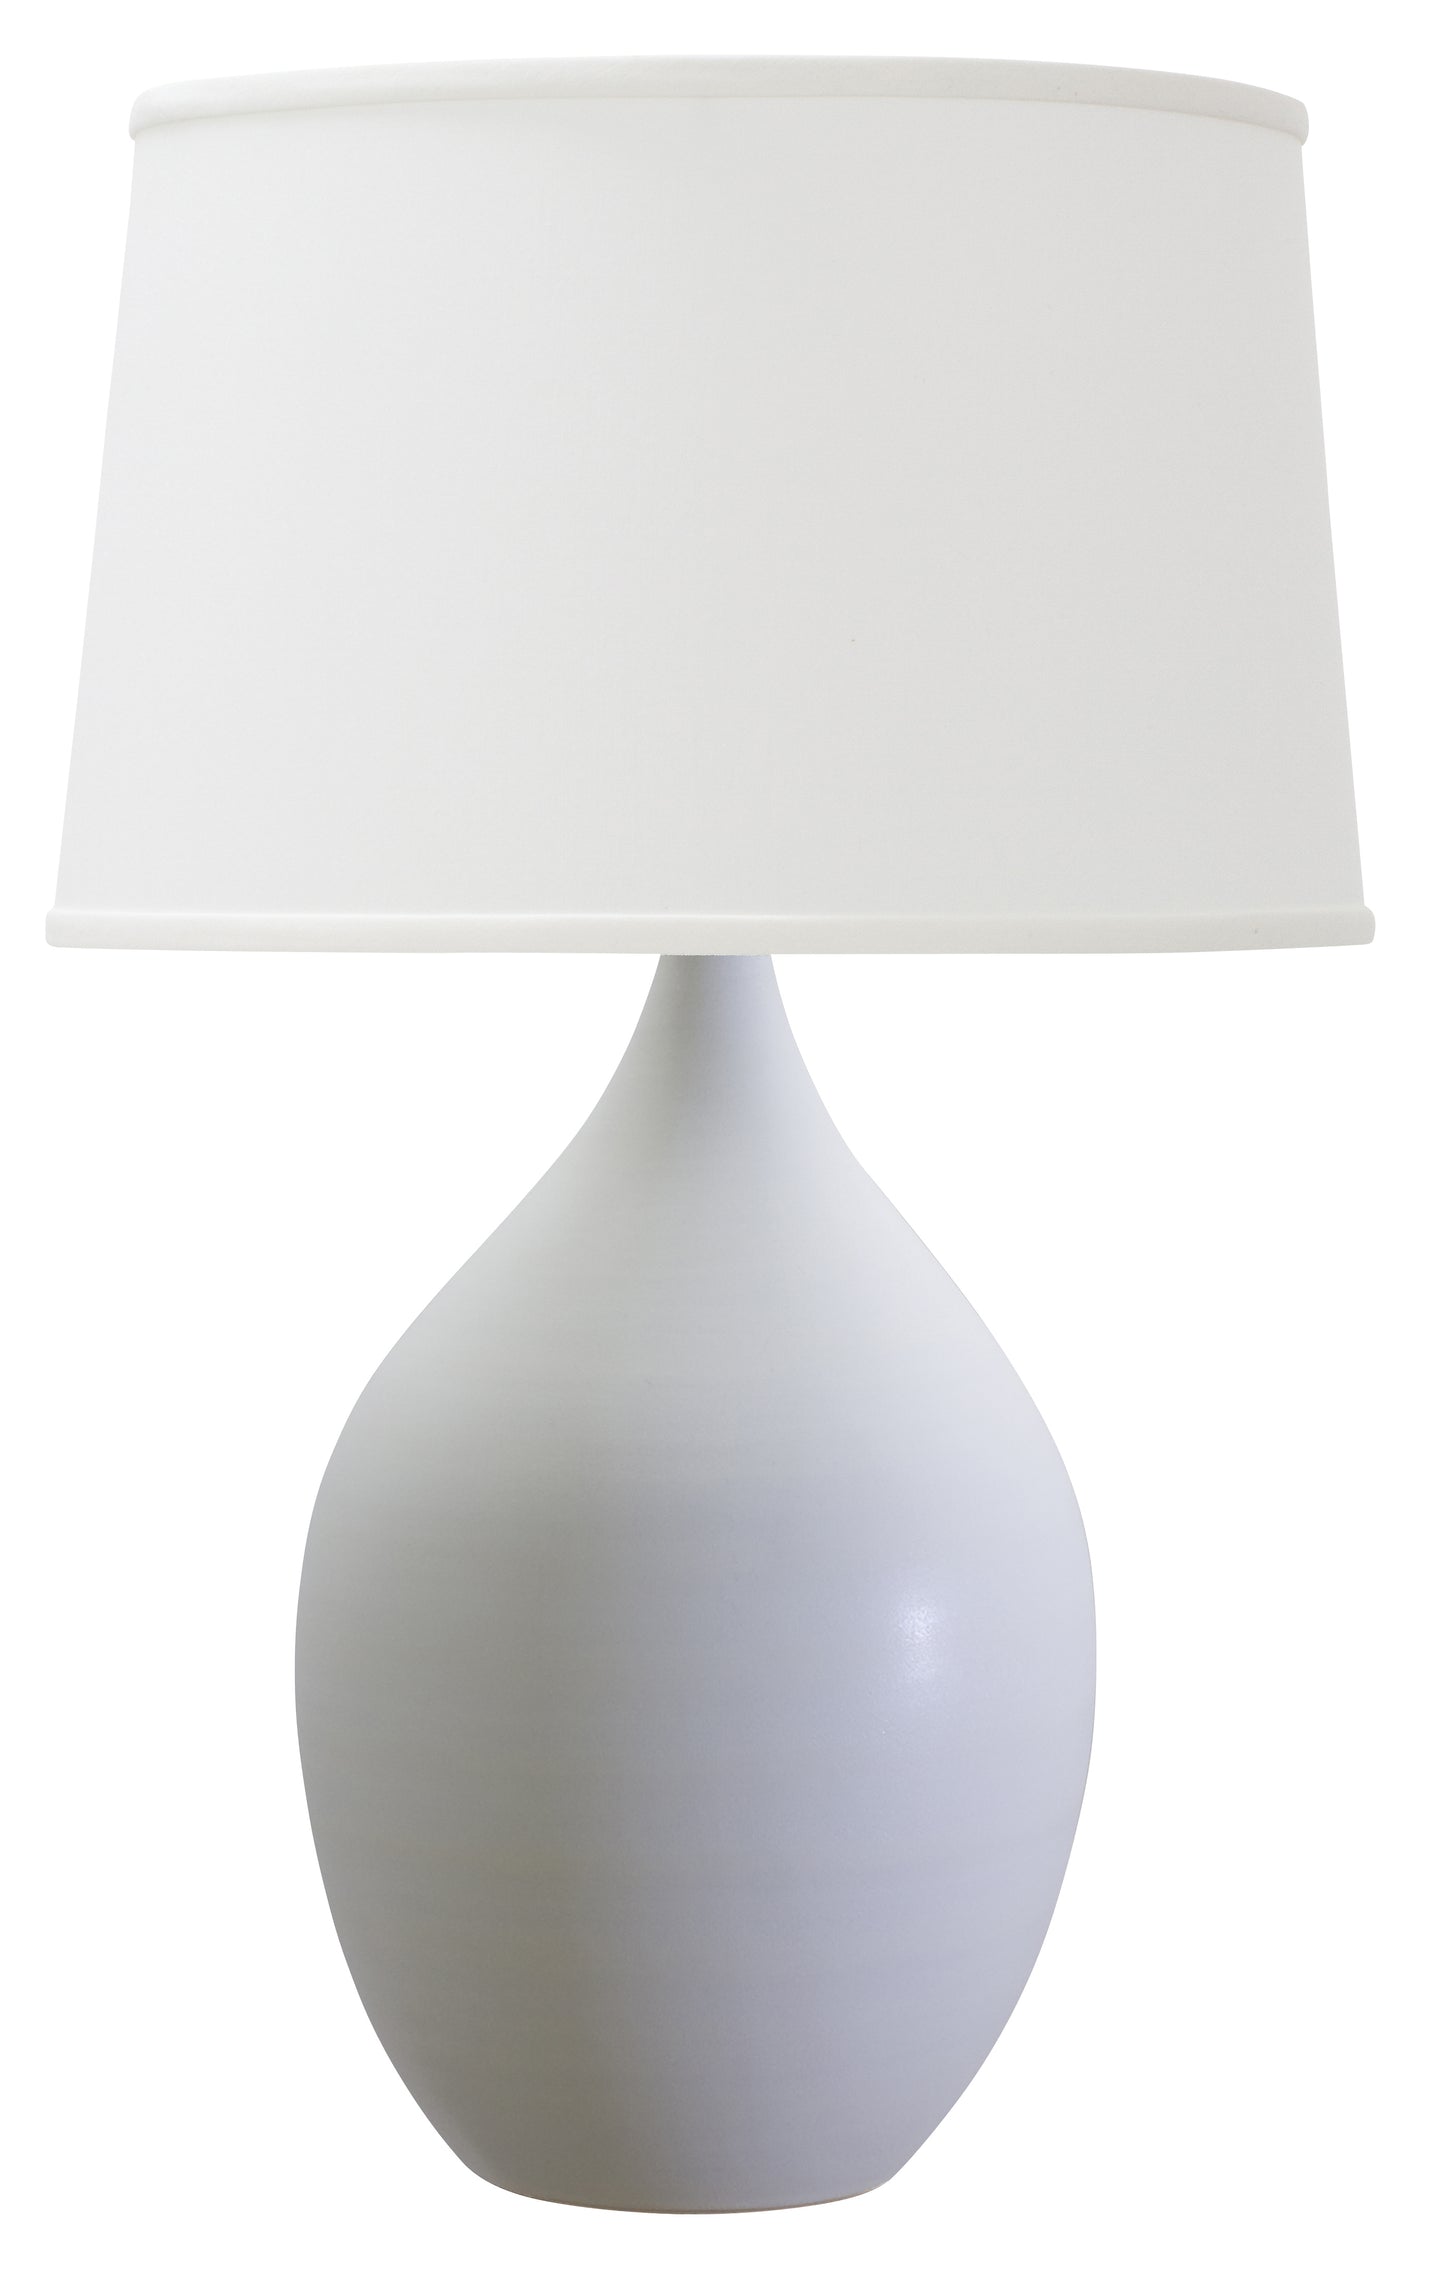 House of Troy Scatchard 18.5" Stoneware Table Lamp White Matte GS202-WM